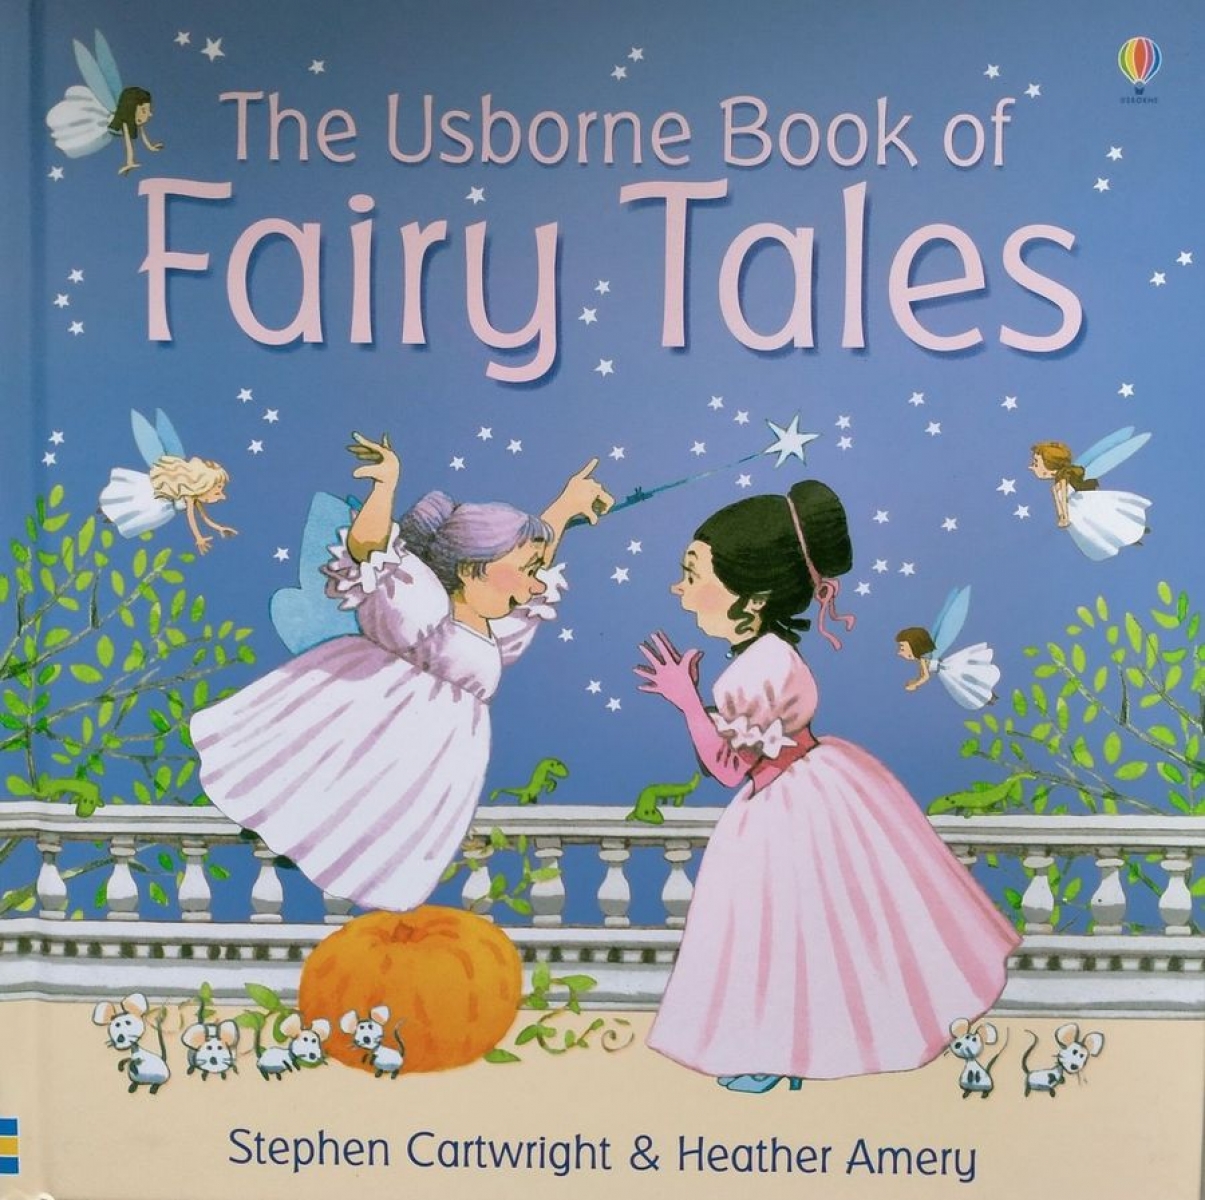 Amery, Heather () The Usborne Book of Fairy Tales 